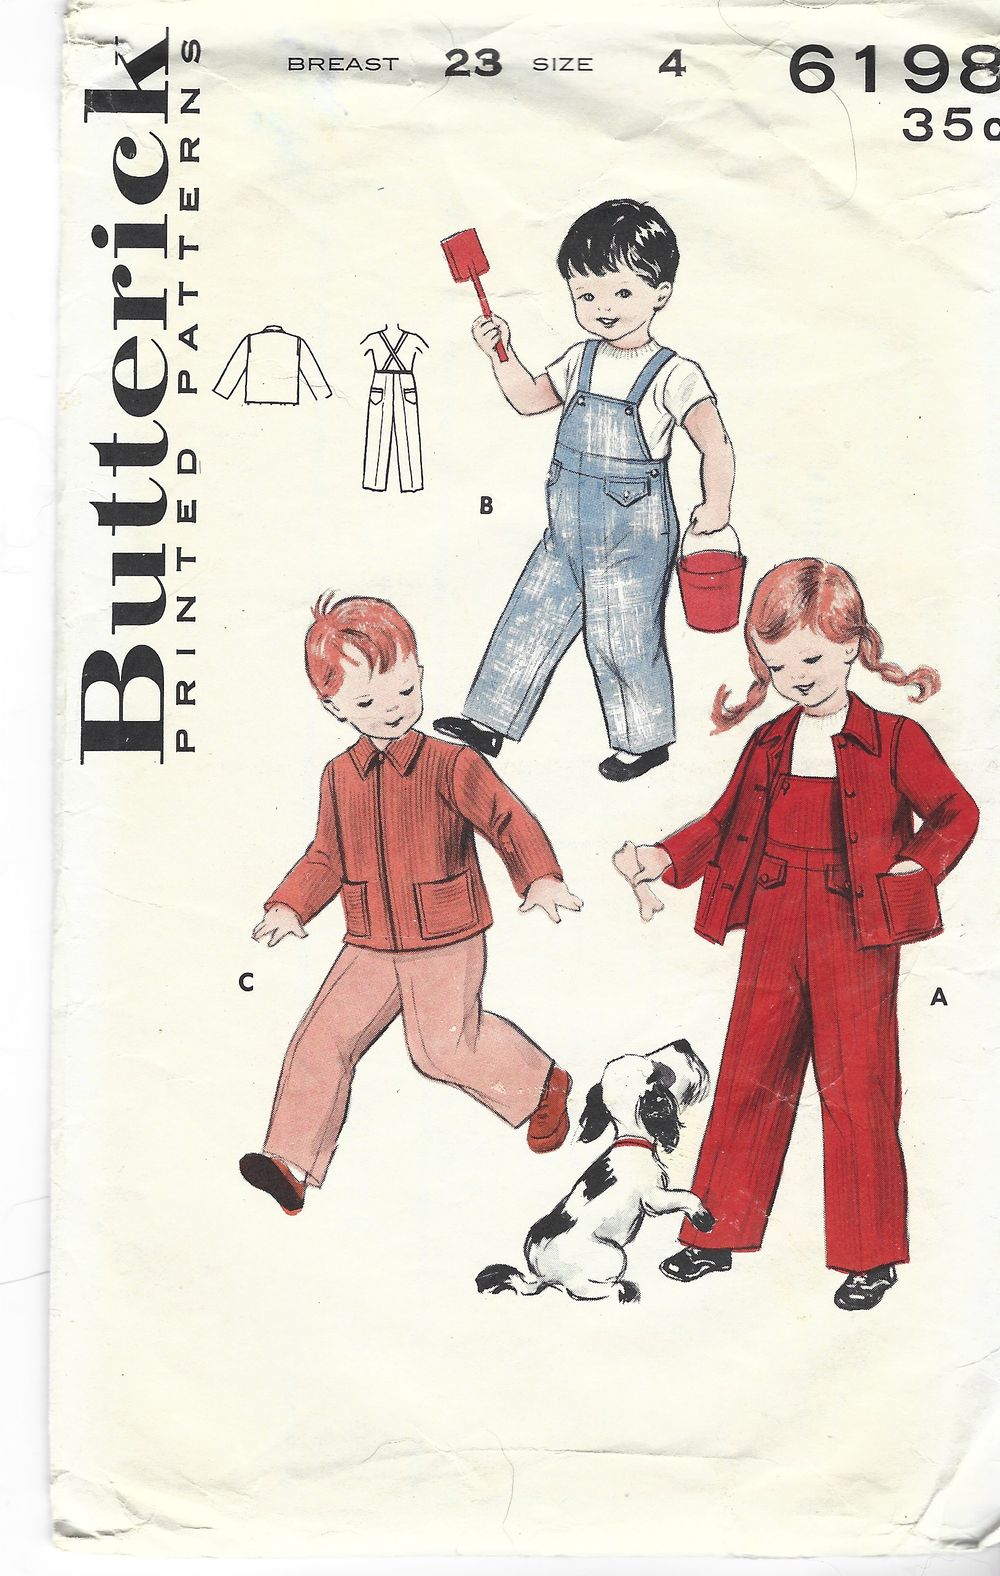 Butterick 6198 Childrens Overalls Jacket Boys Girls Vintage Sewing Pattern 1950s